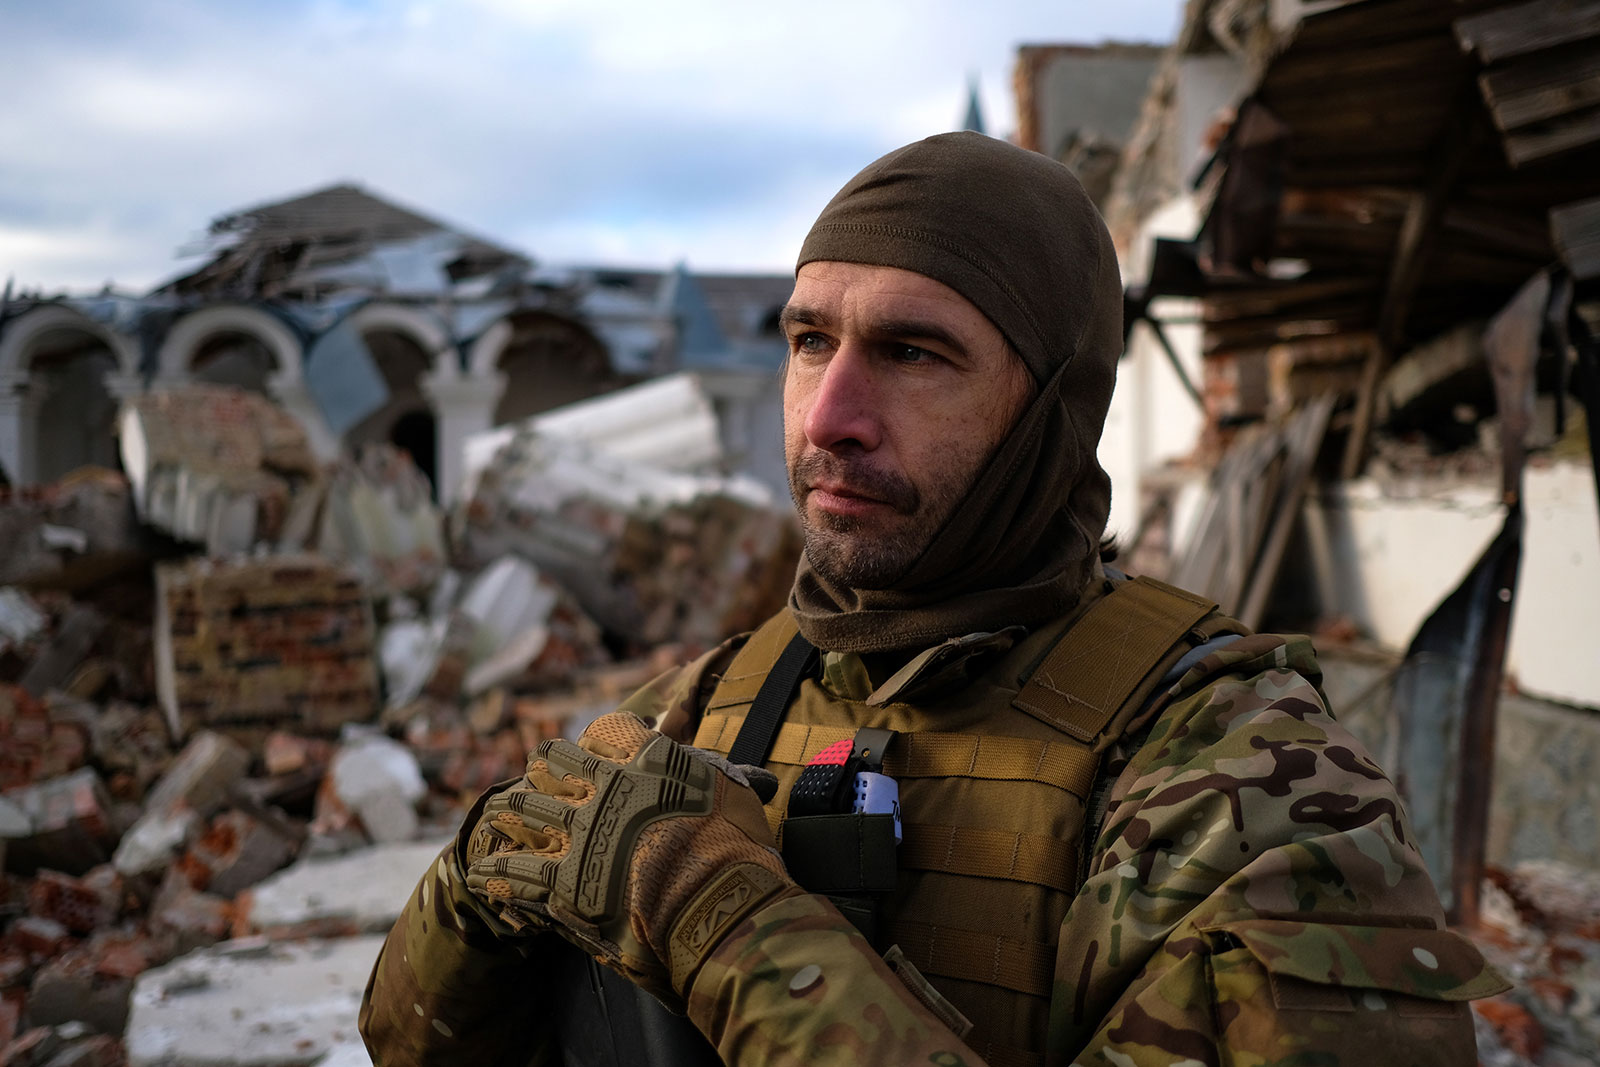 "Caesar" is one of dozens of Russian nationals fighting to defend Ukraine from Putin's armies.